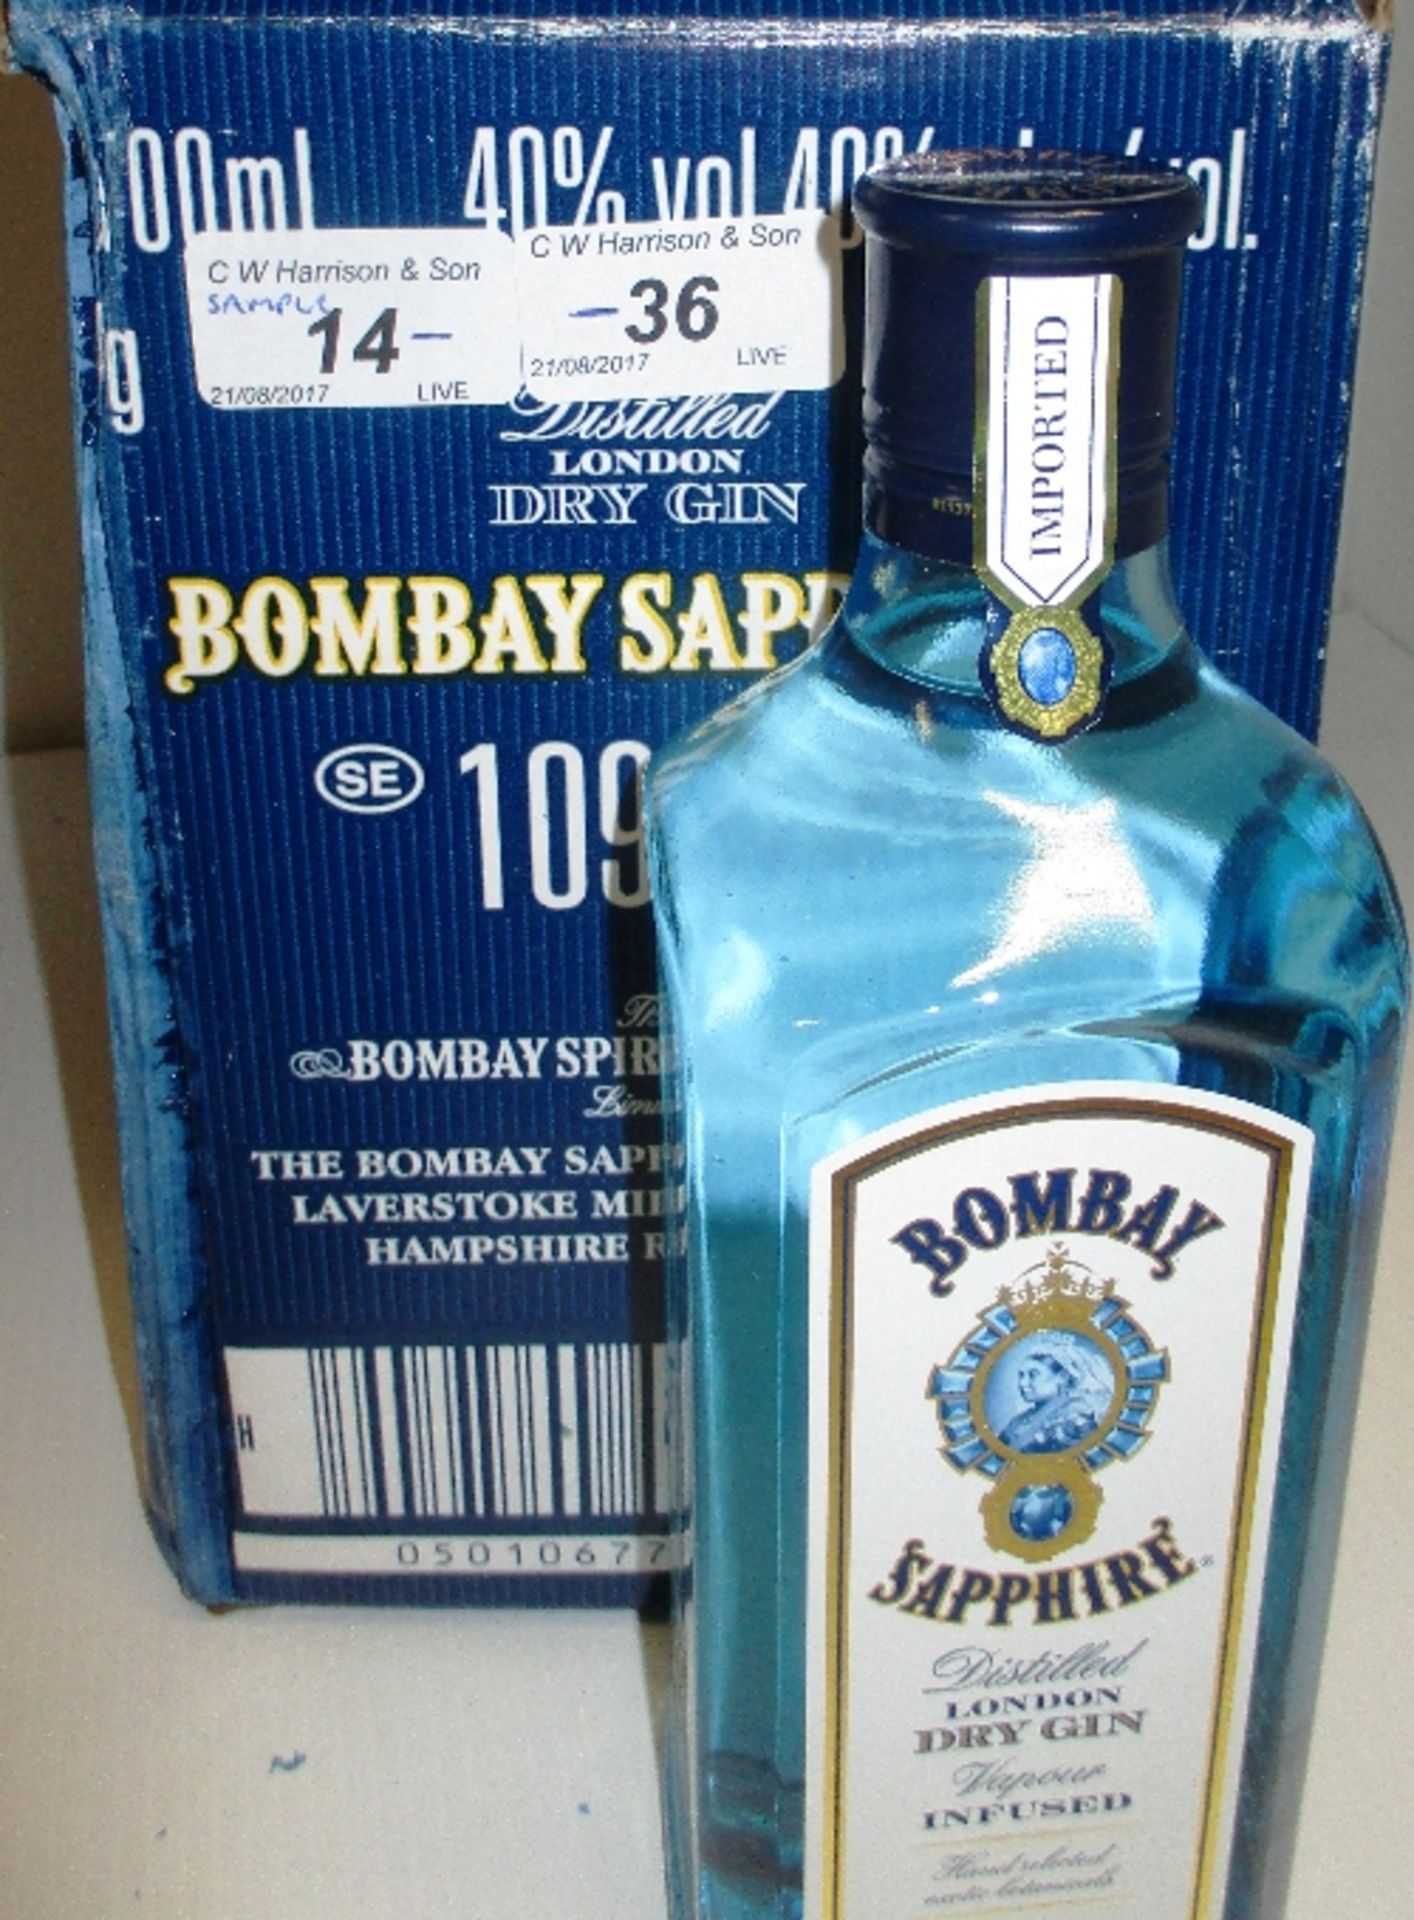 12 x 700ml bottles of Bombay Sapphire distilled London Dry Gin - 2 boxes